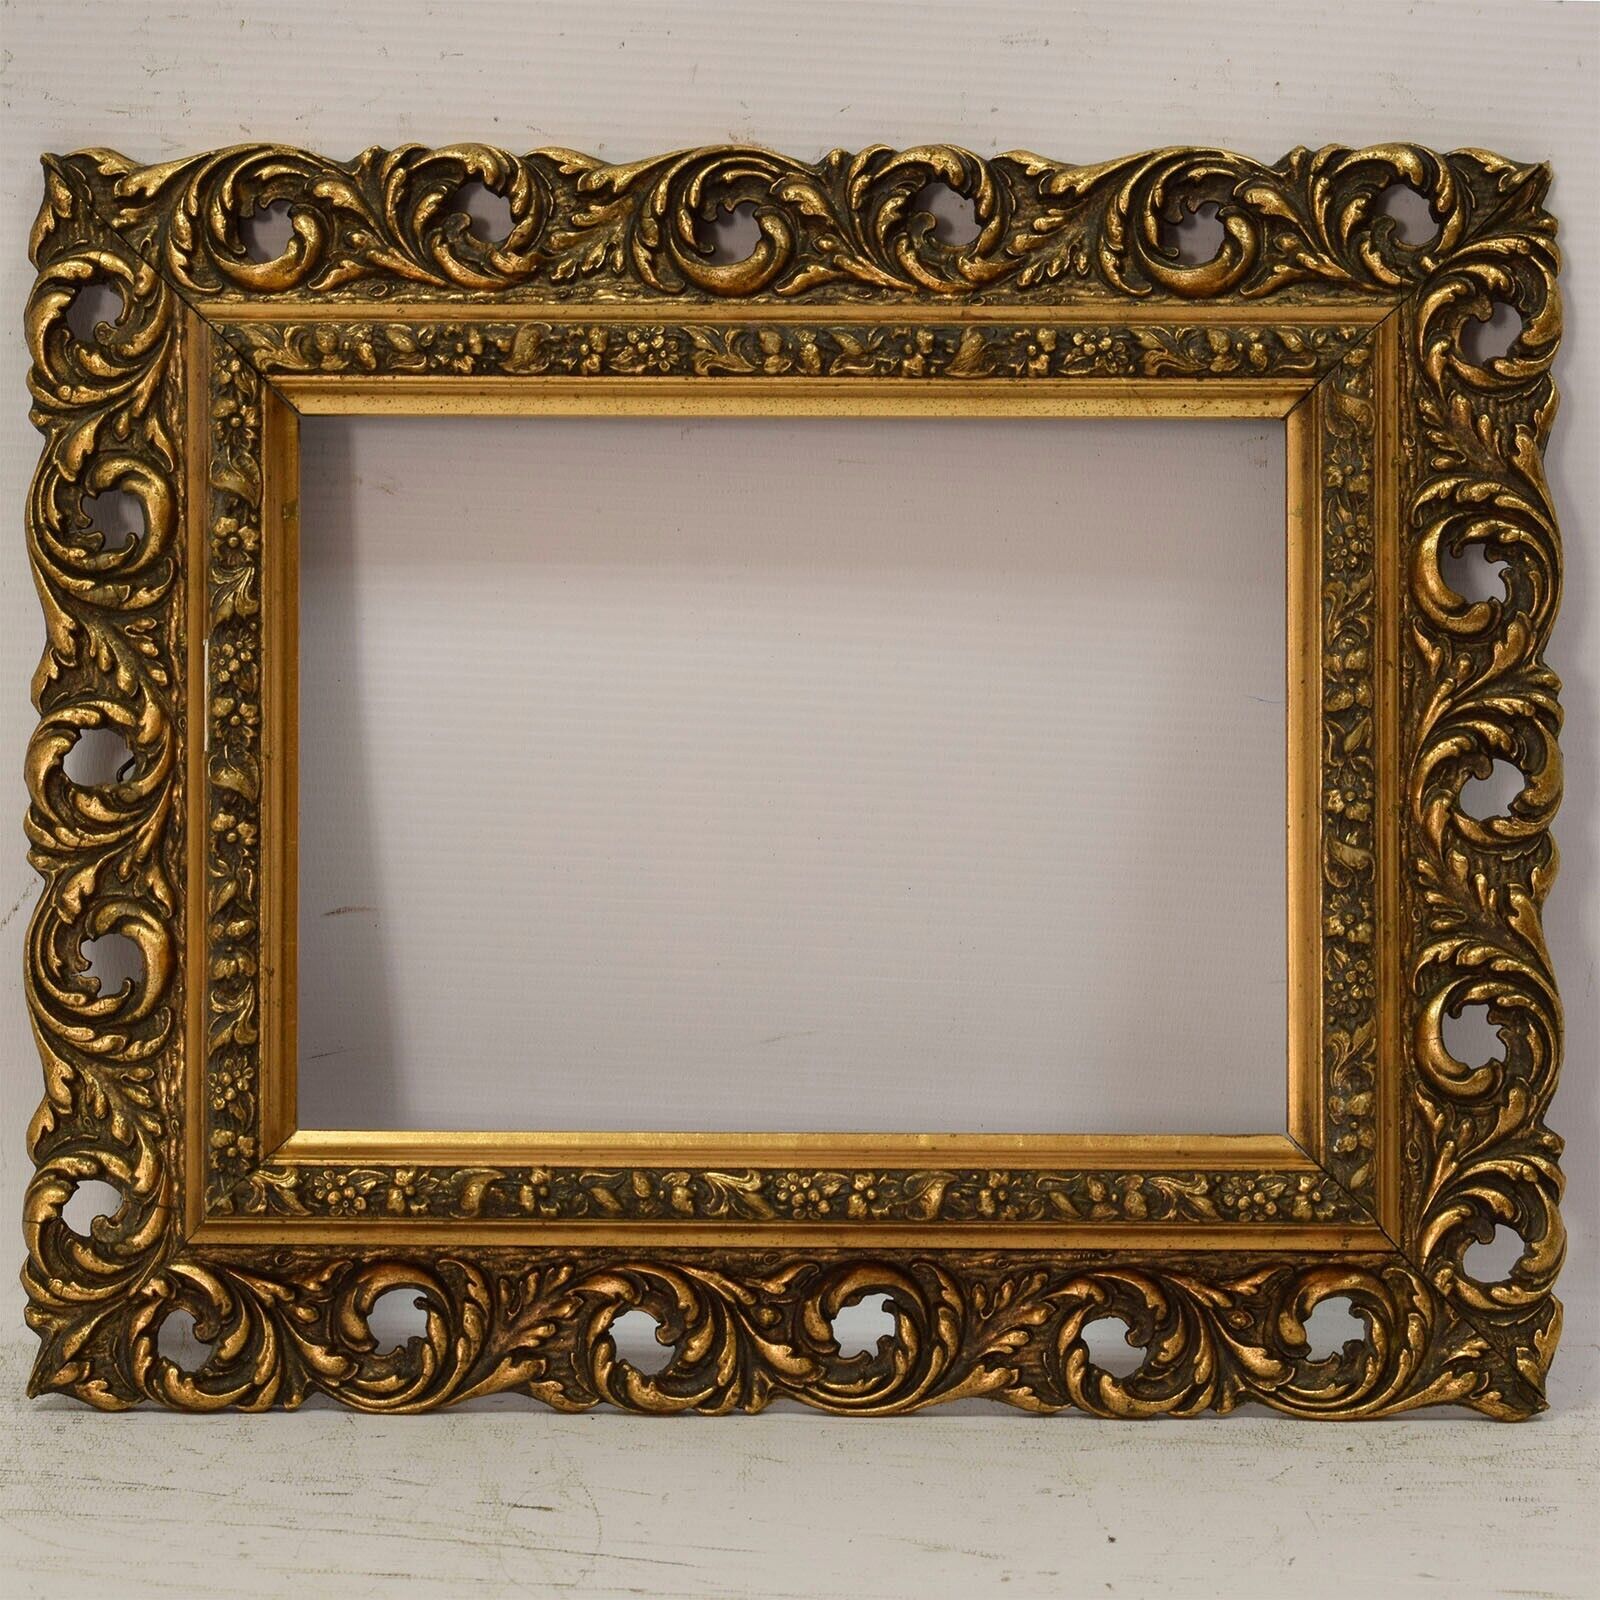 19th cent old wooden frame, original condition, dimensions 9.4 x 7.1 in